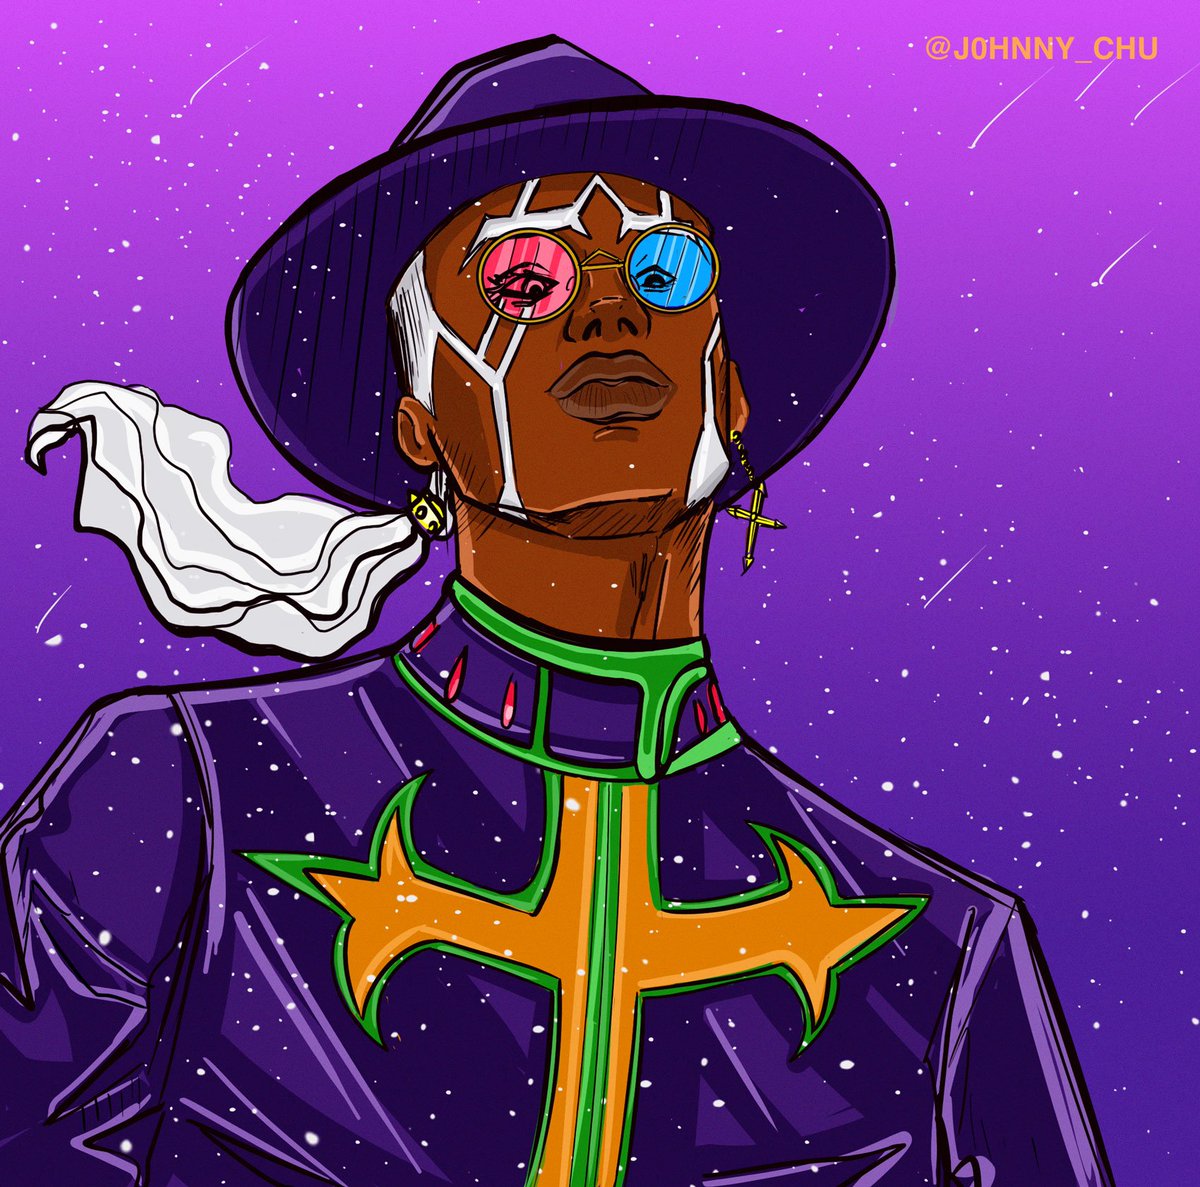 Johnny On Twitter Enrico Pucci For Day 2 Space Stoceanweek2019 Jjba.